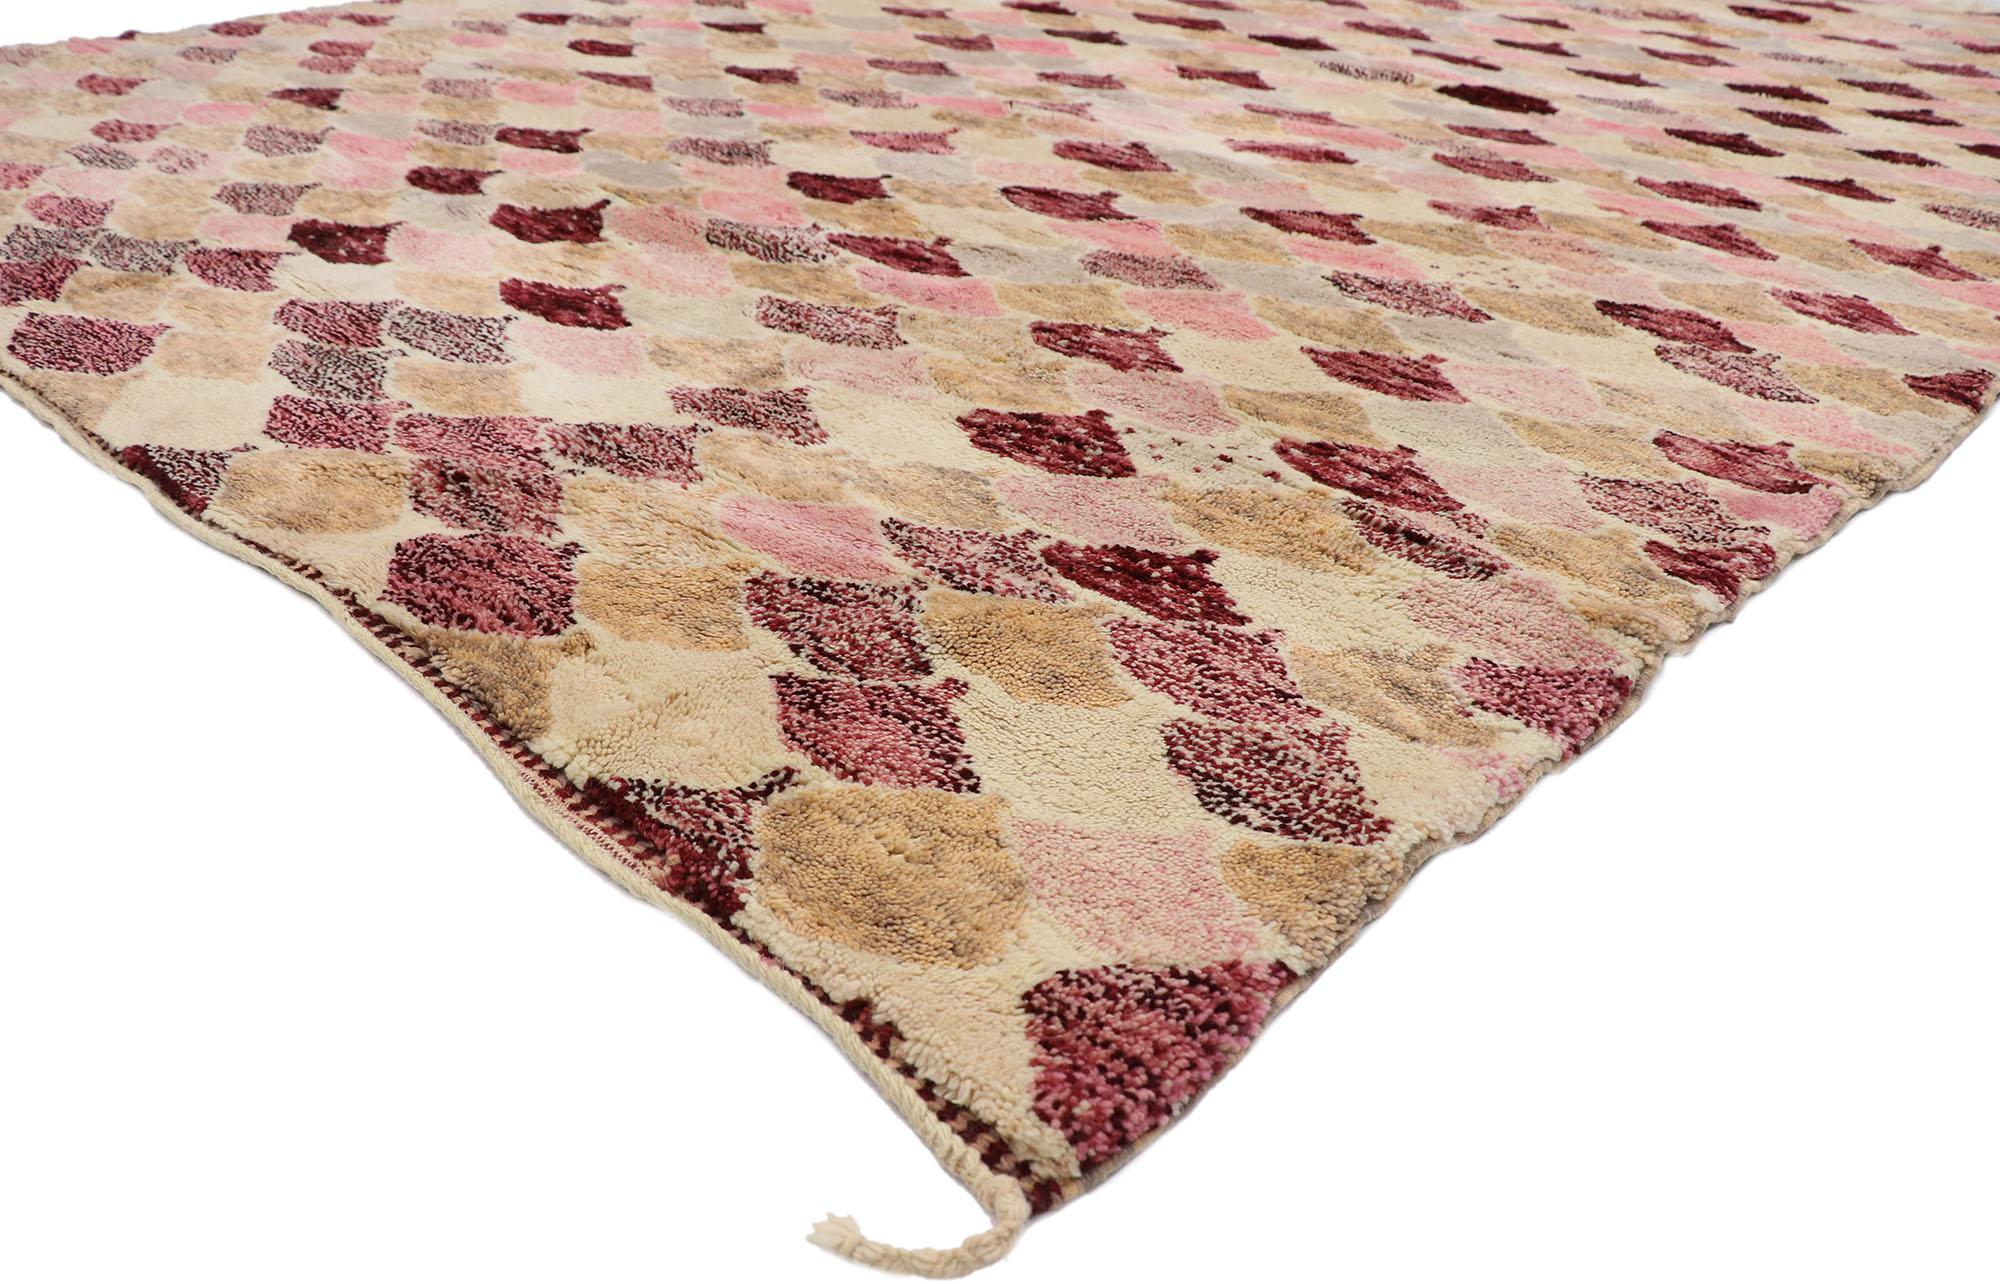 21174 New Contemporary Berber Moroccan Rug with Bohemian Style 10'00 x 13'01. Featuring well-balanced symmetry with a simple design aesthetic, this contemporary Berber Moroccan rug adds texture and subtle graphic appeal forming a warm, relaxed